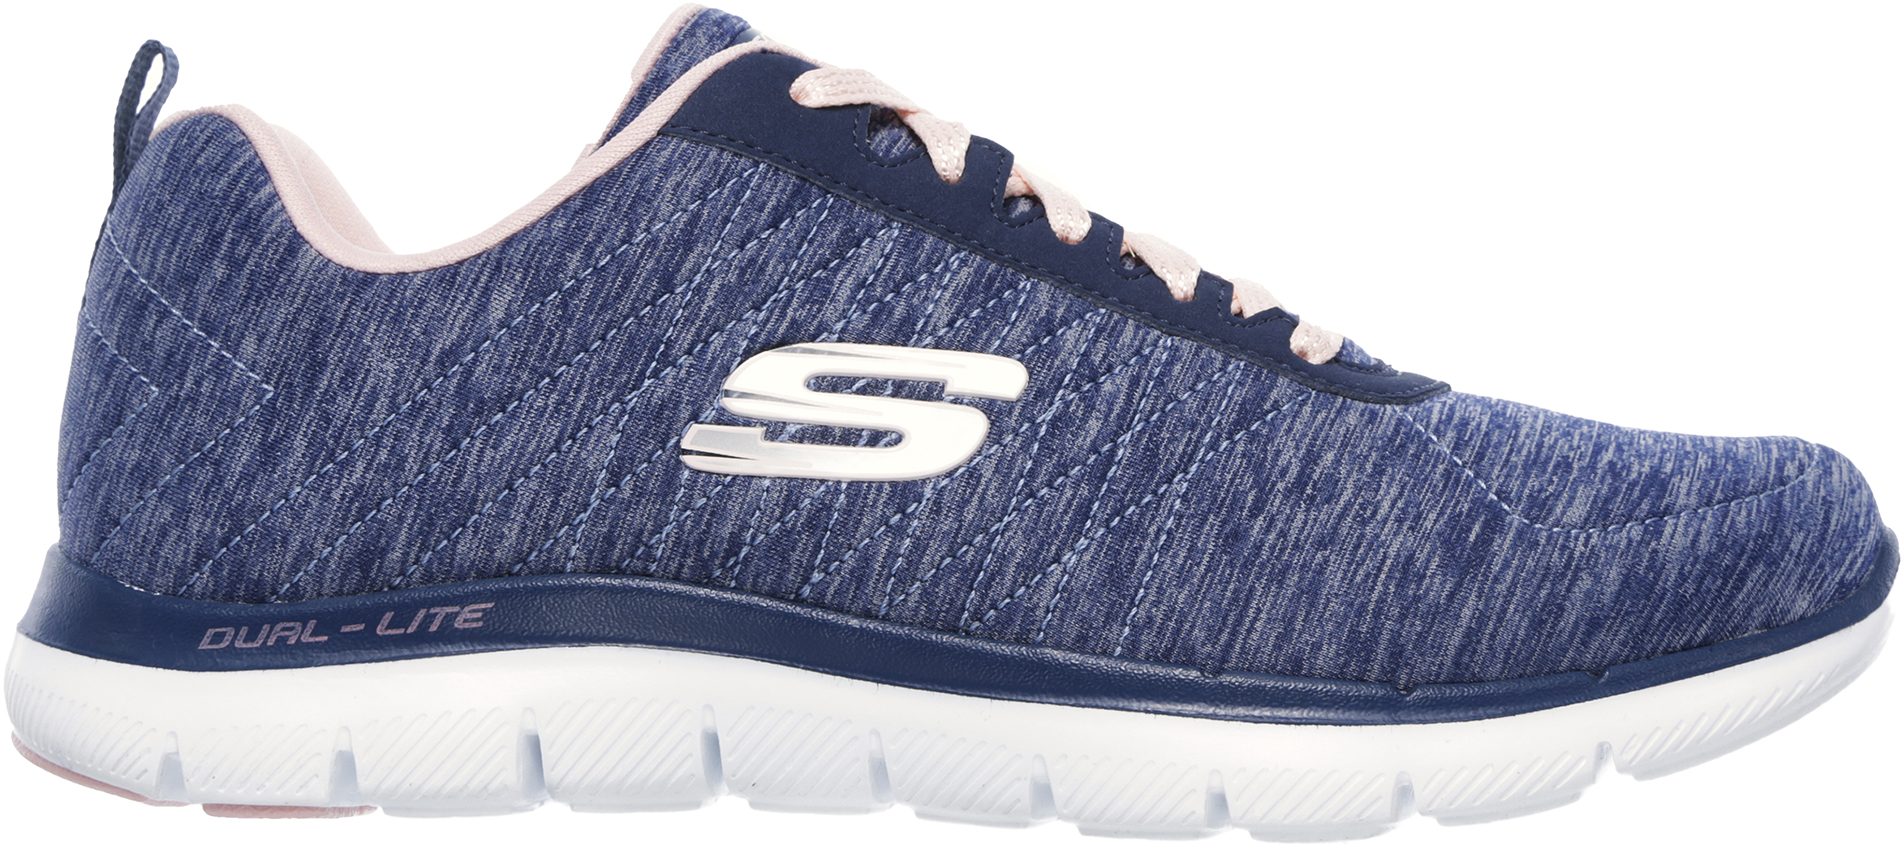 Skechers Flex Appeal 2.0 Navy 12753 NVY - Womens Trainers - Humphries Shoes